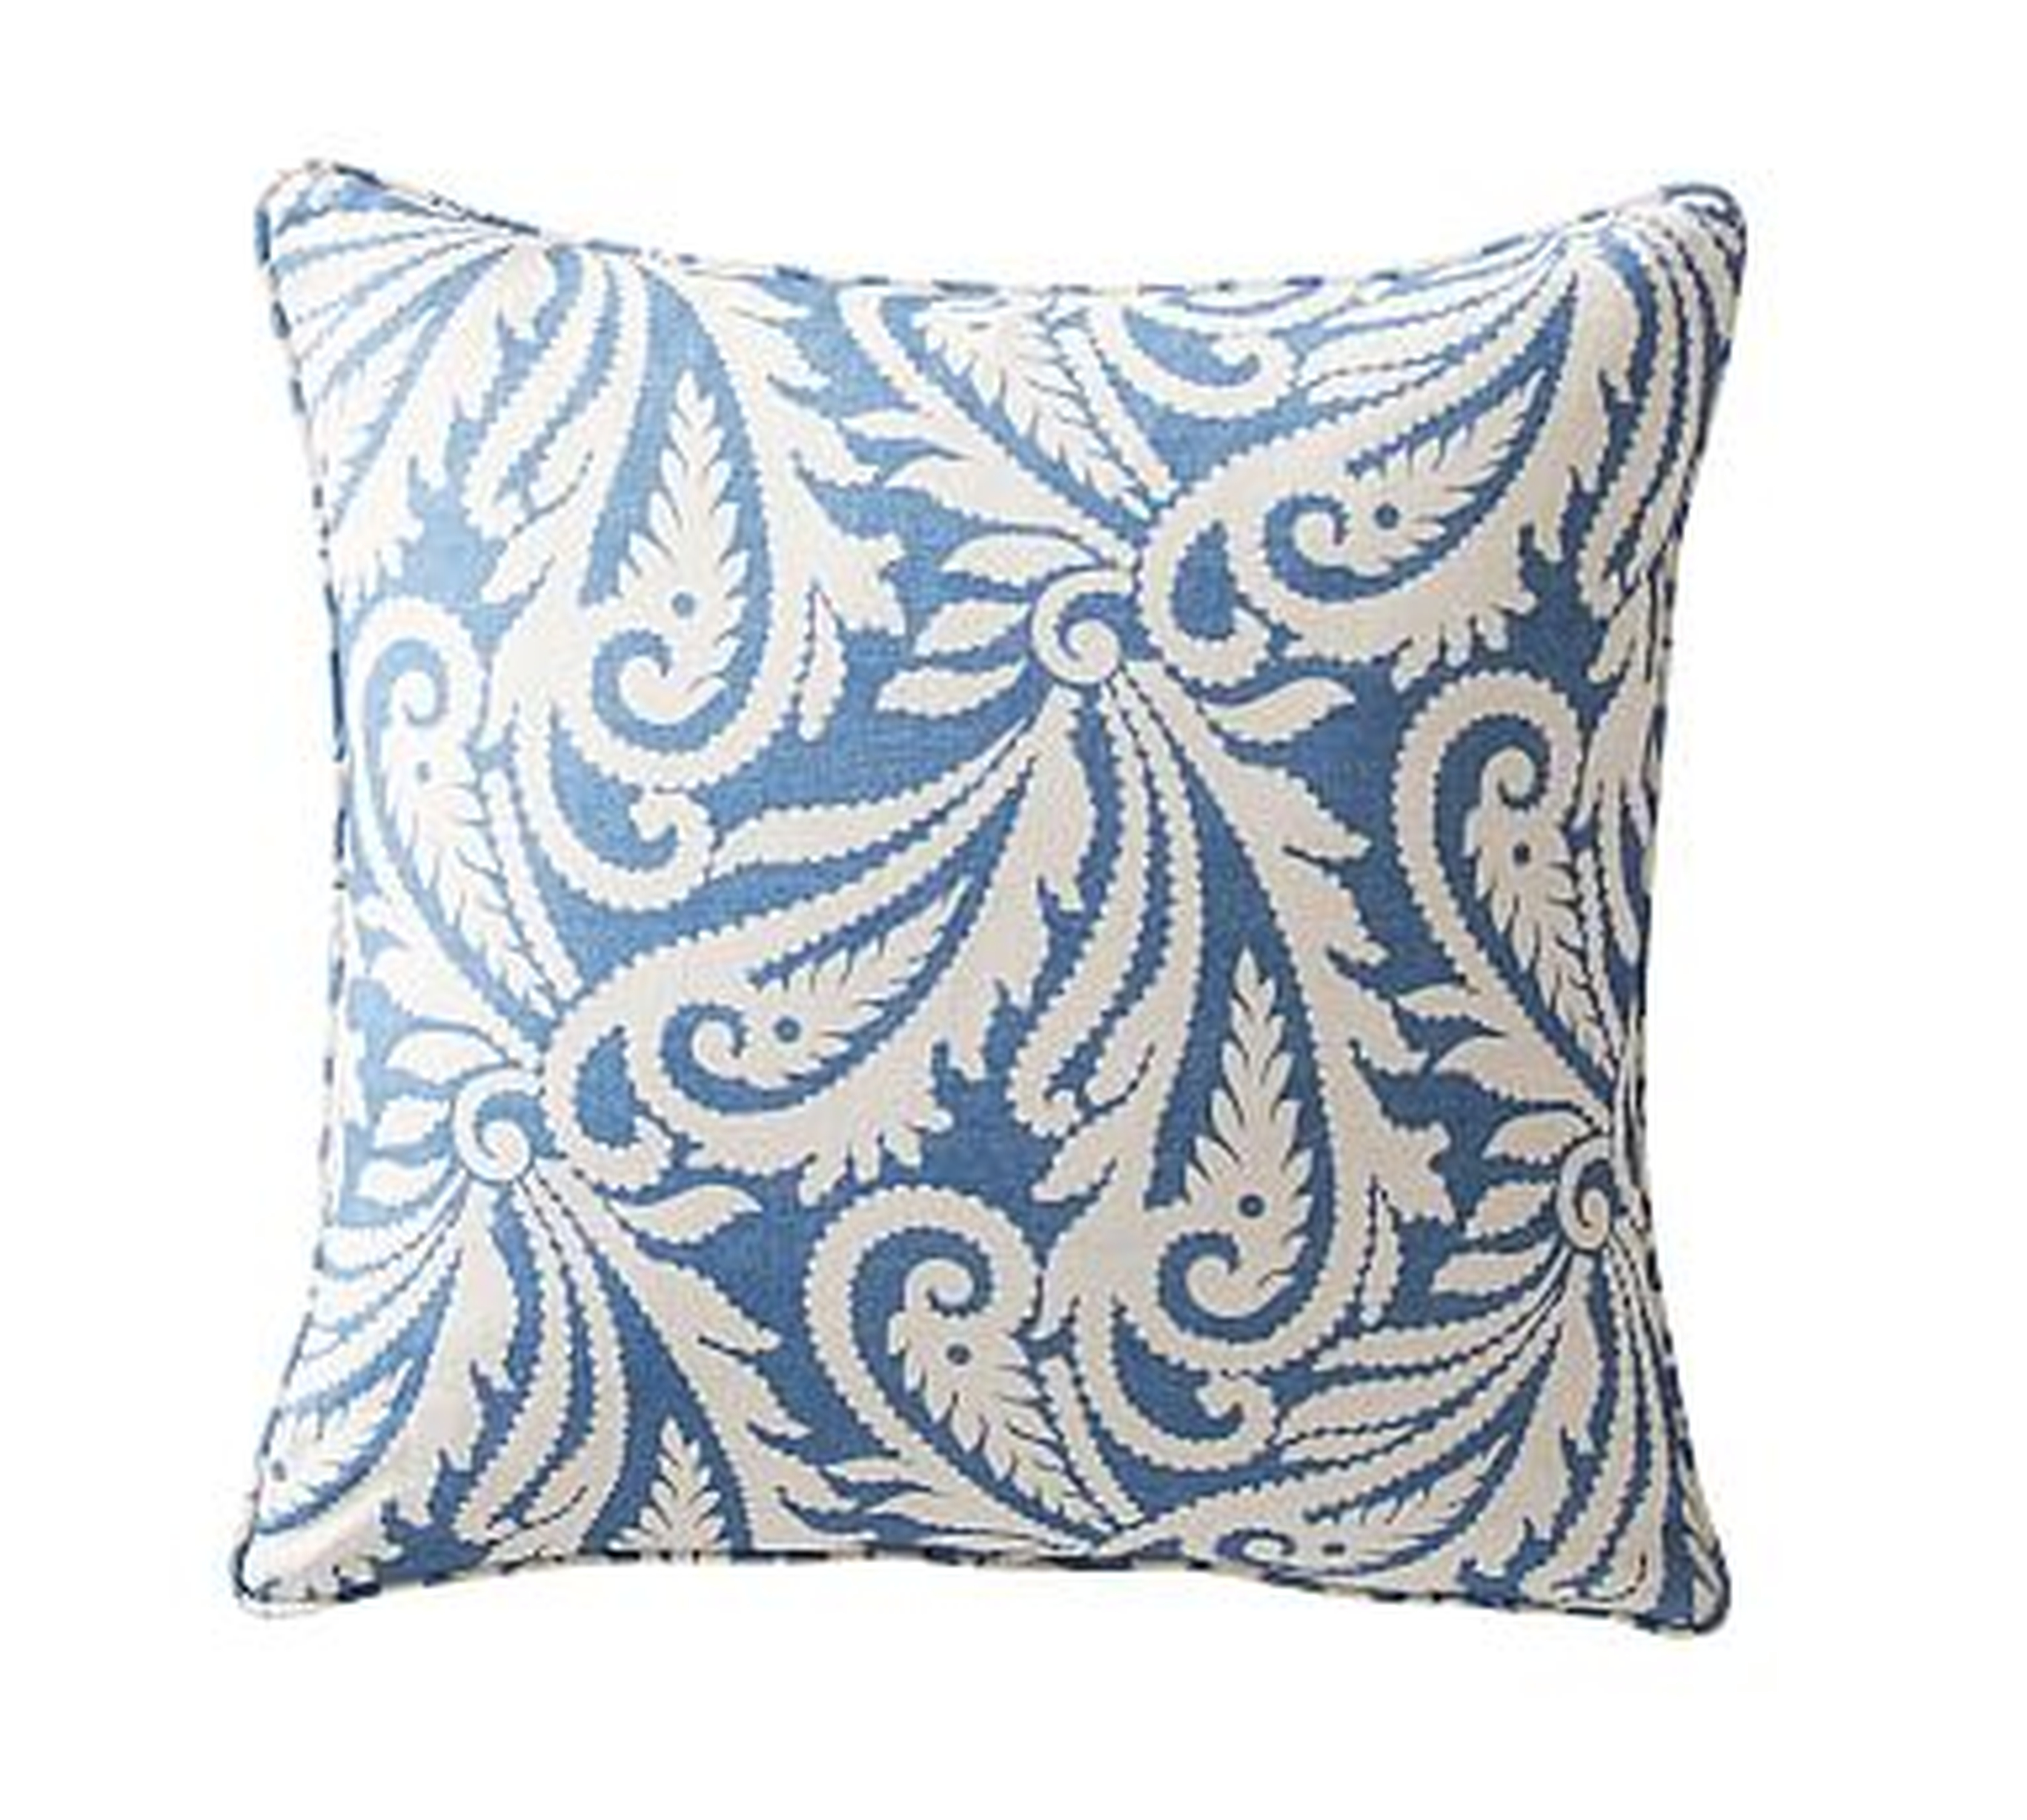 Wynnfield Paisley Print Pillow Cover, 20", Harbor Blue/Ivory - Pottery Barn